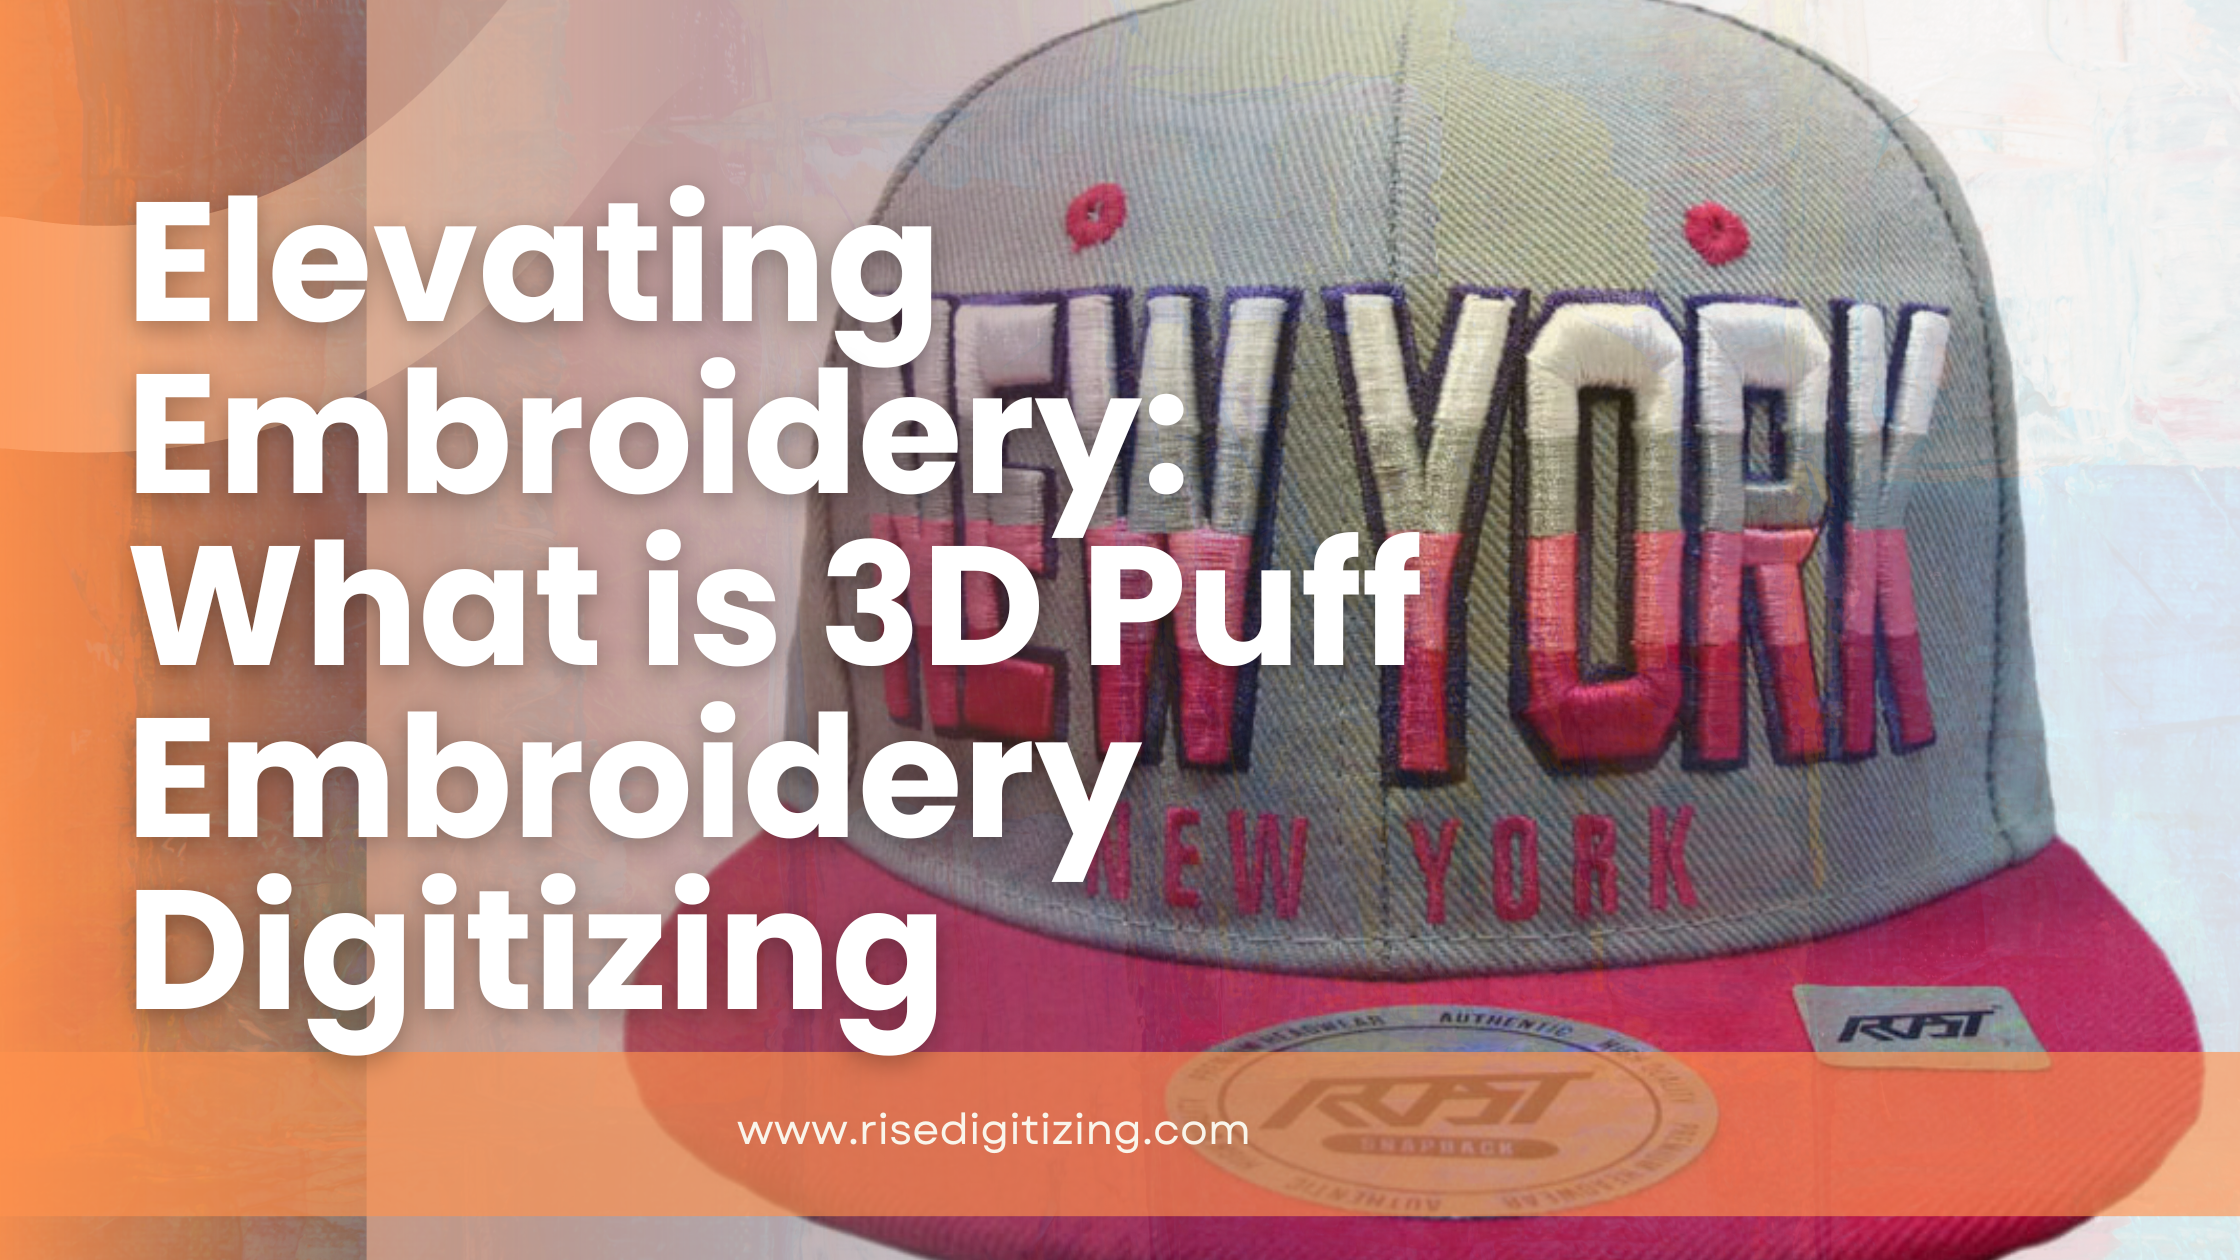 What is 3D Puff Embroidery Digitizing?